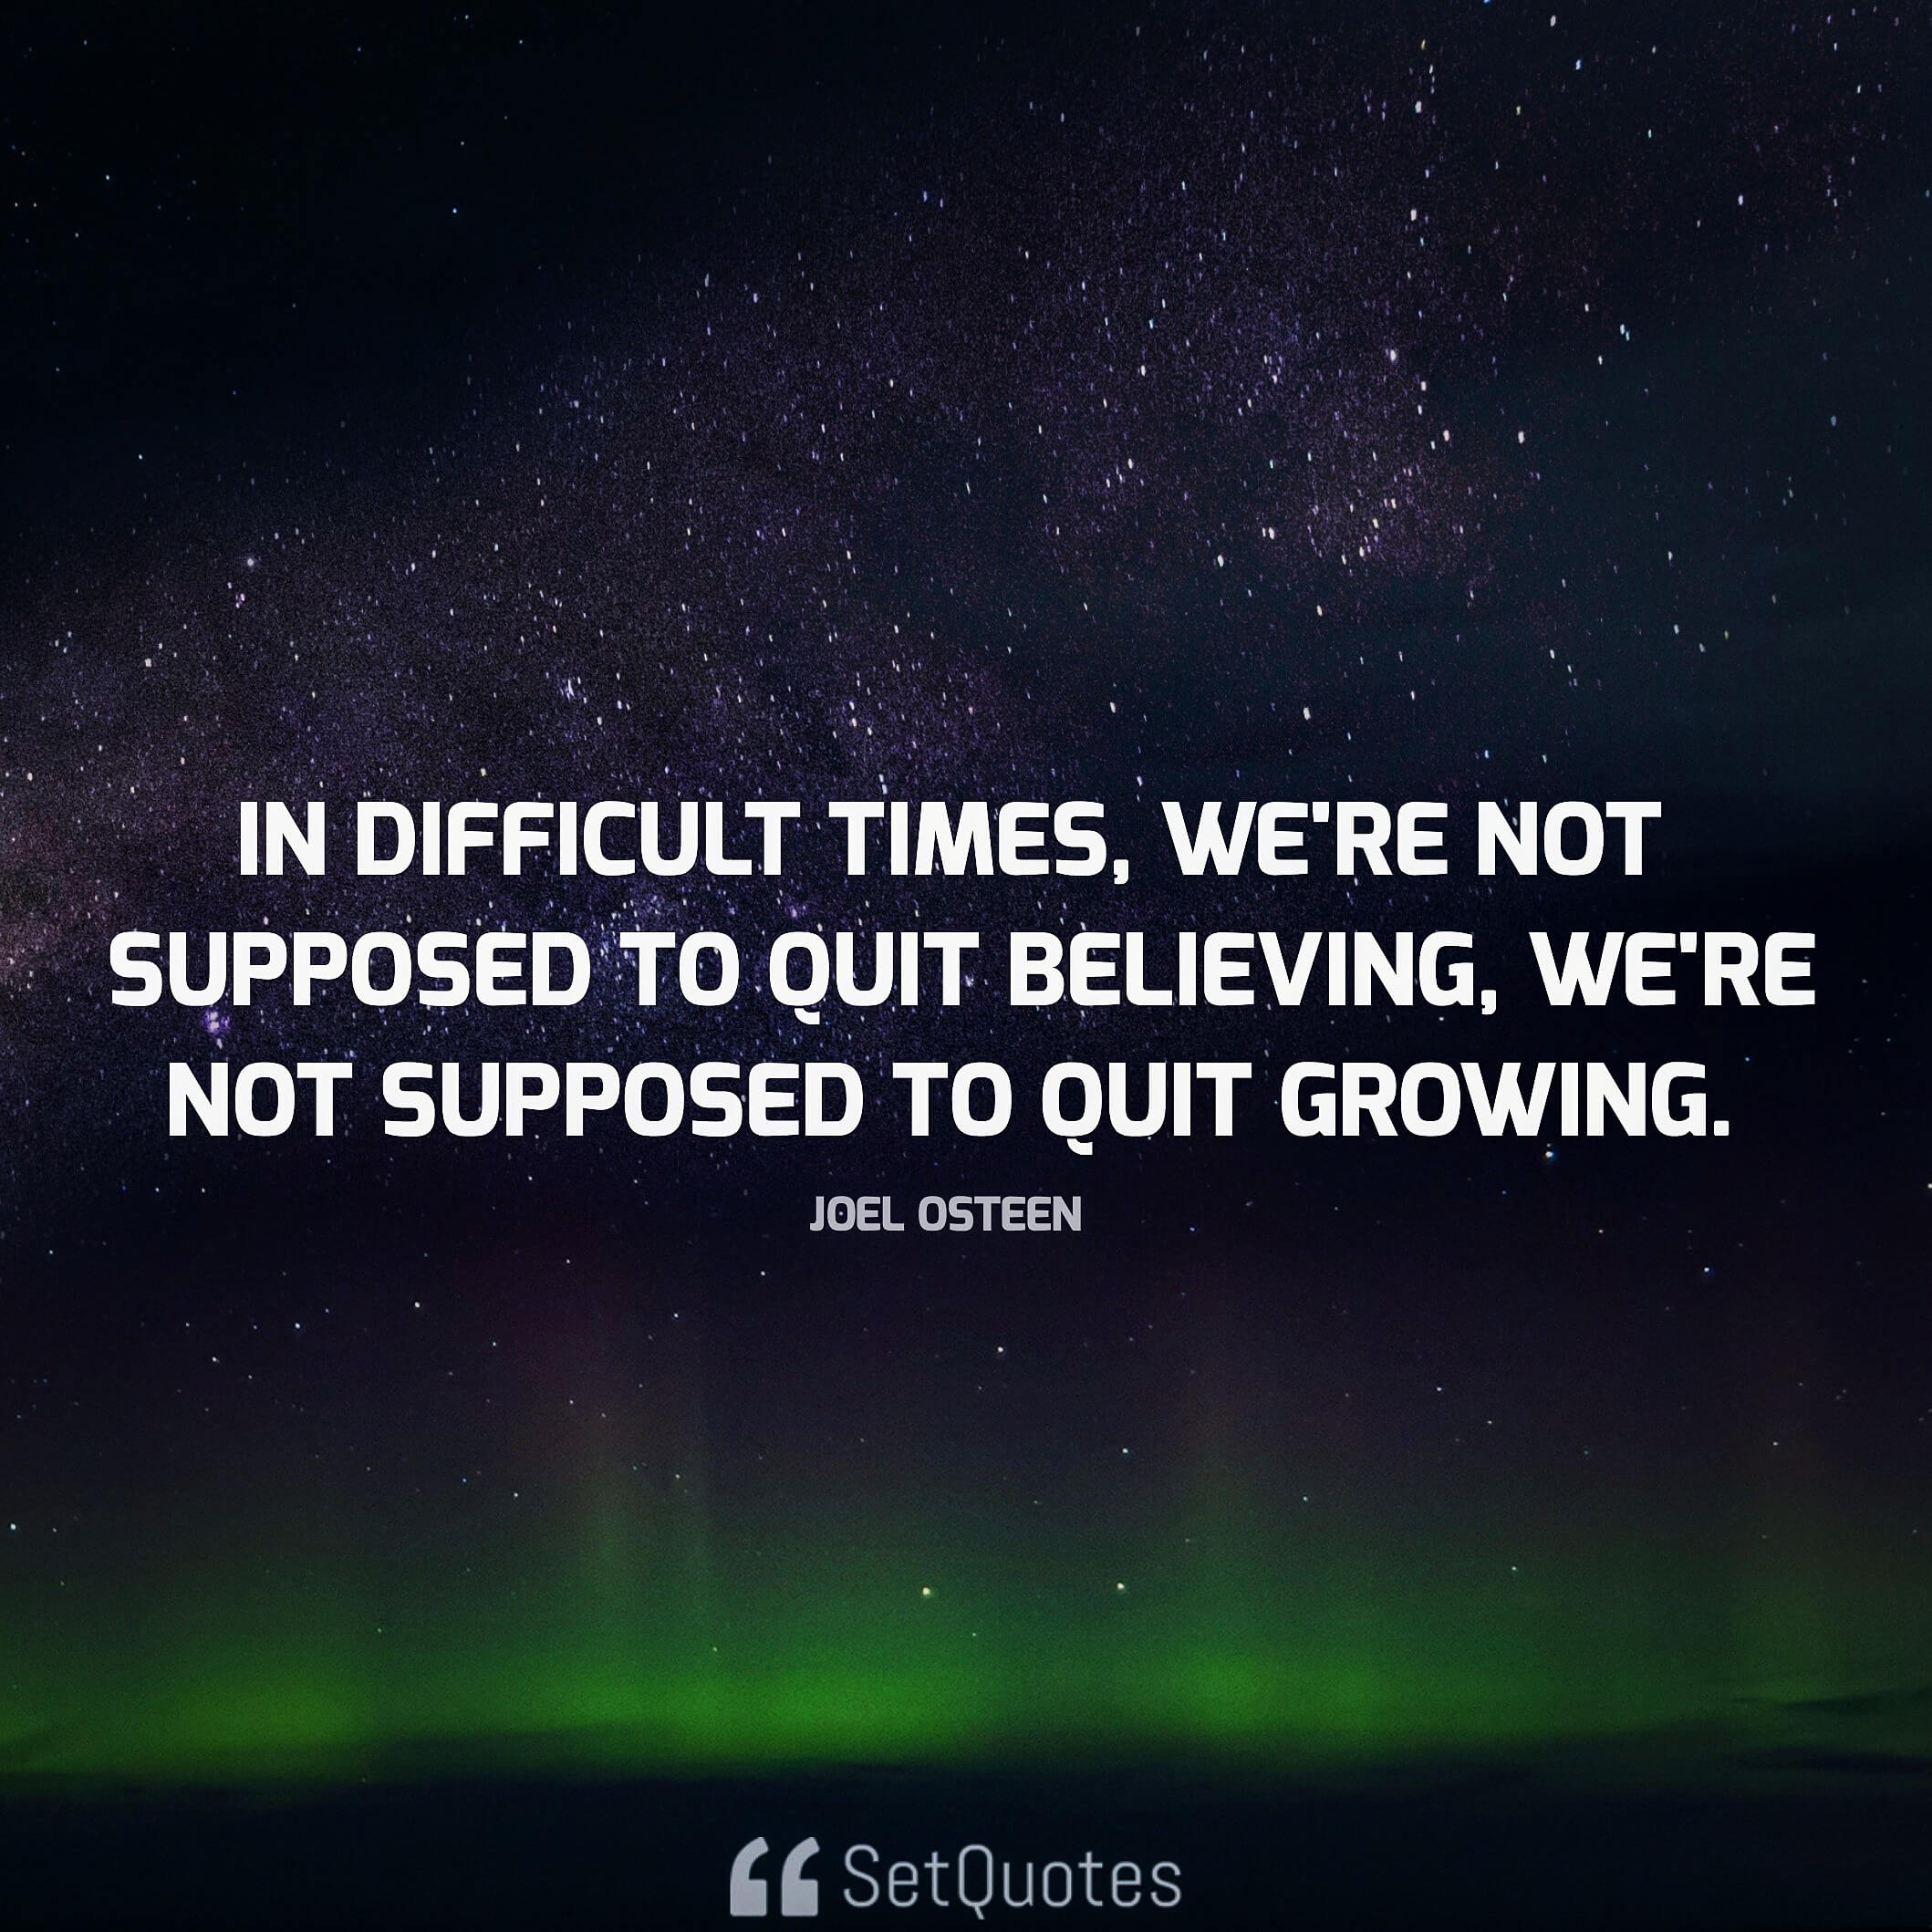 In difficult times, we're not supposed to quit believing; we're not supposed to quit growing. - Joel Osteen